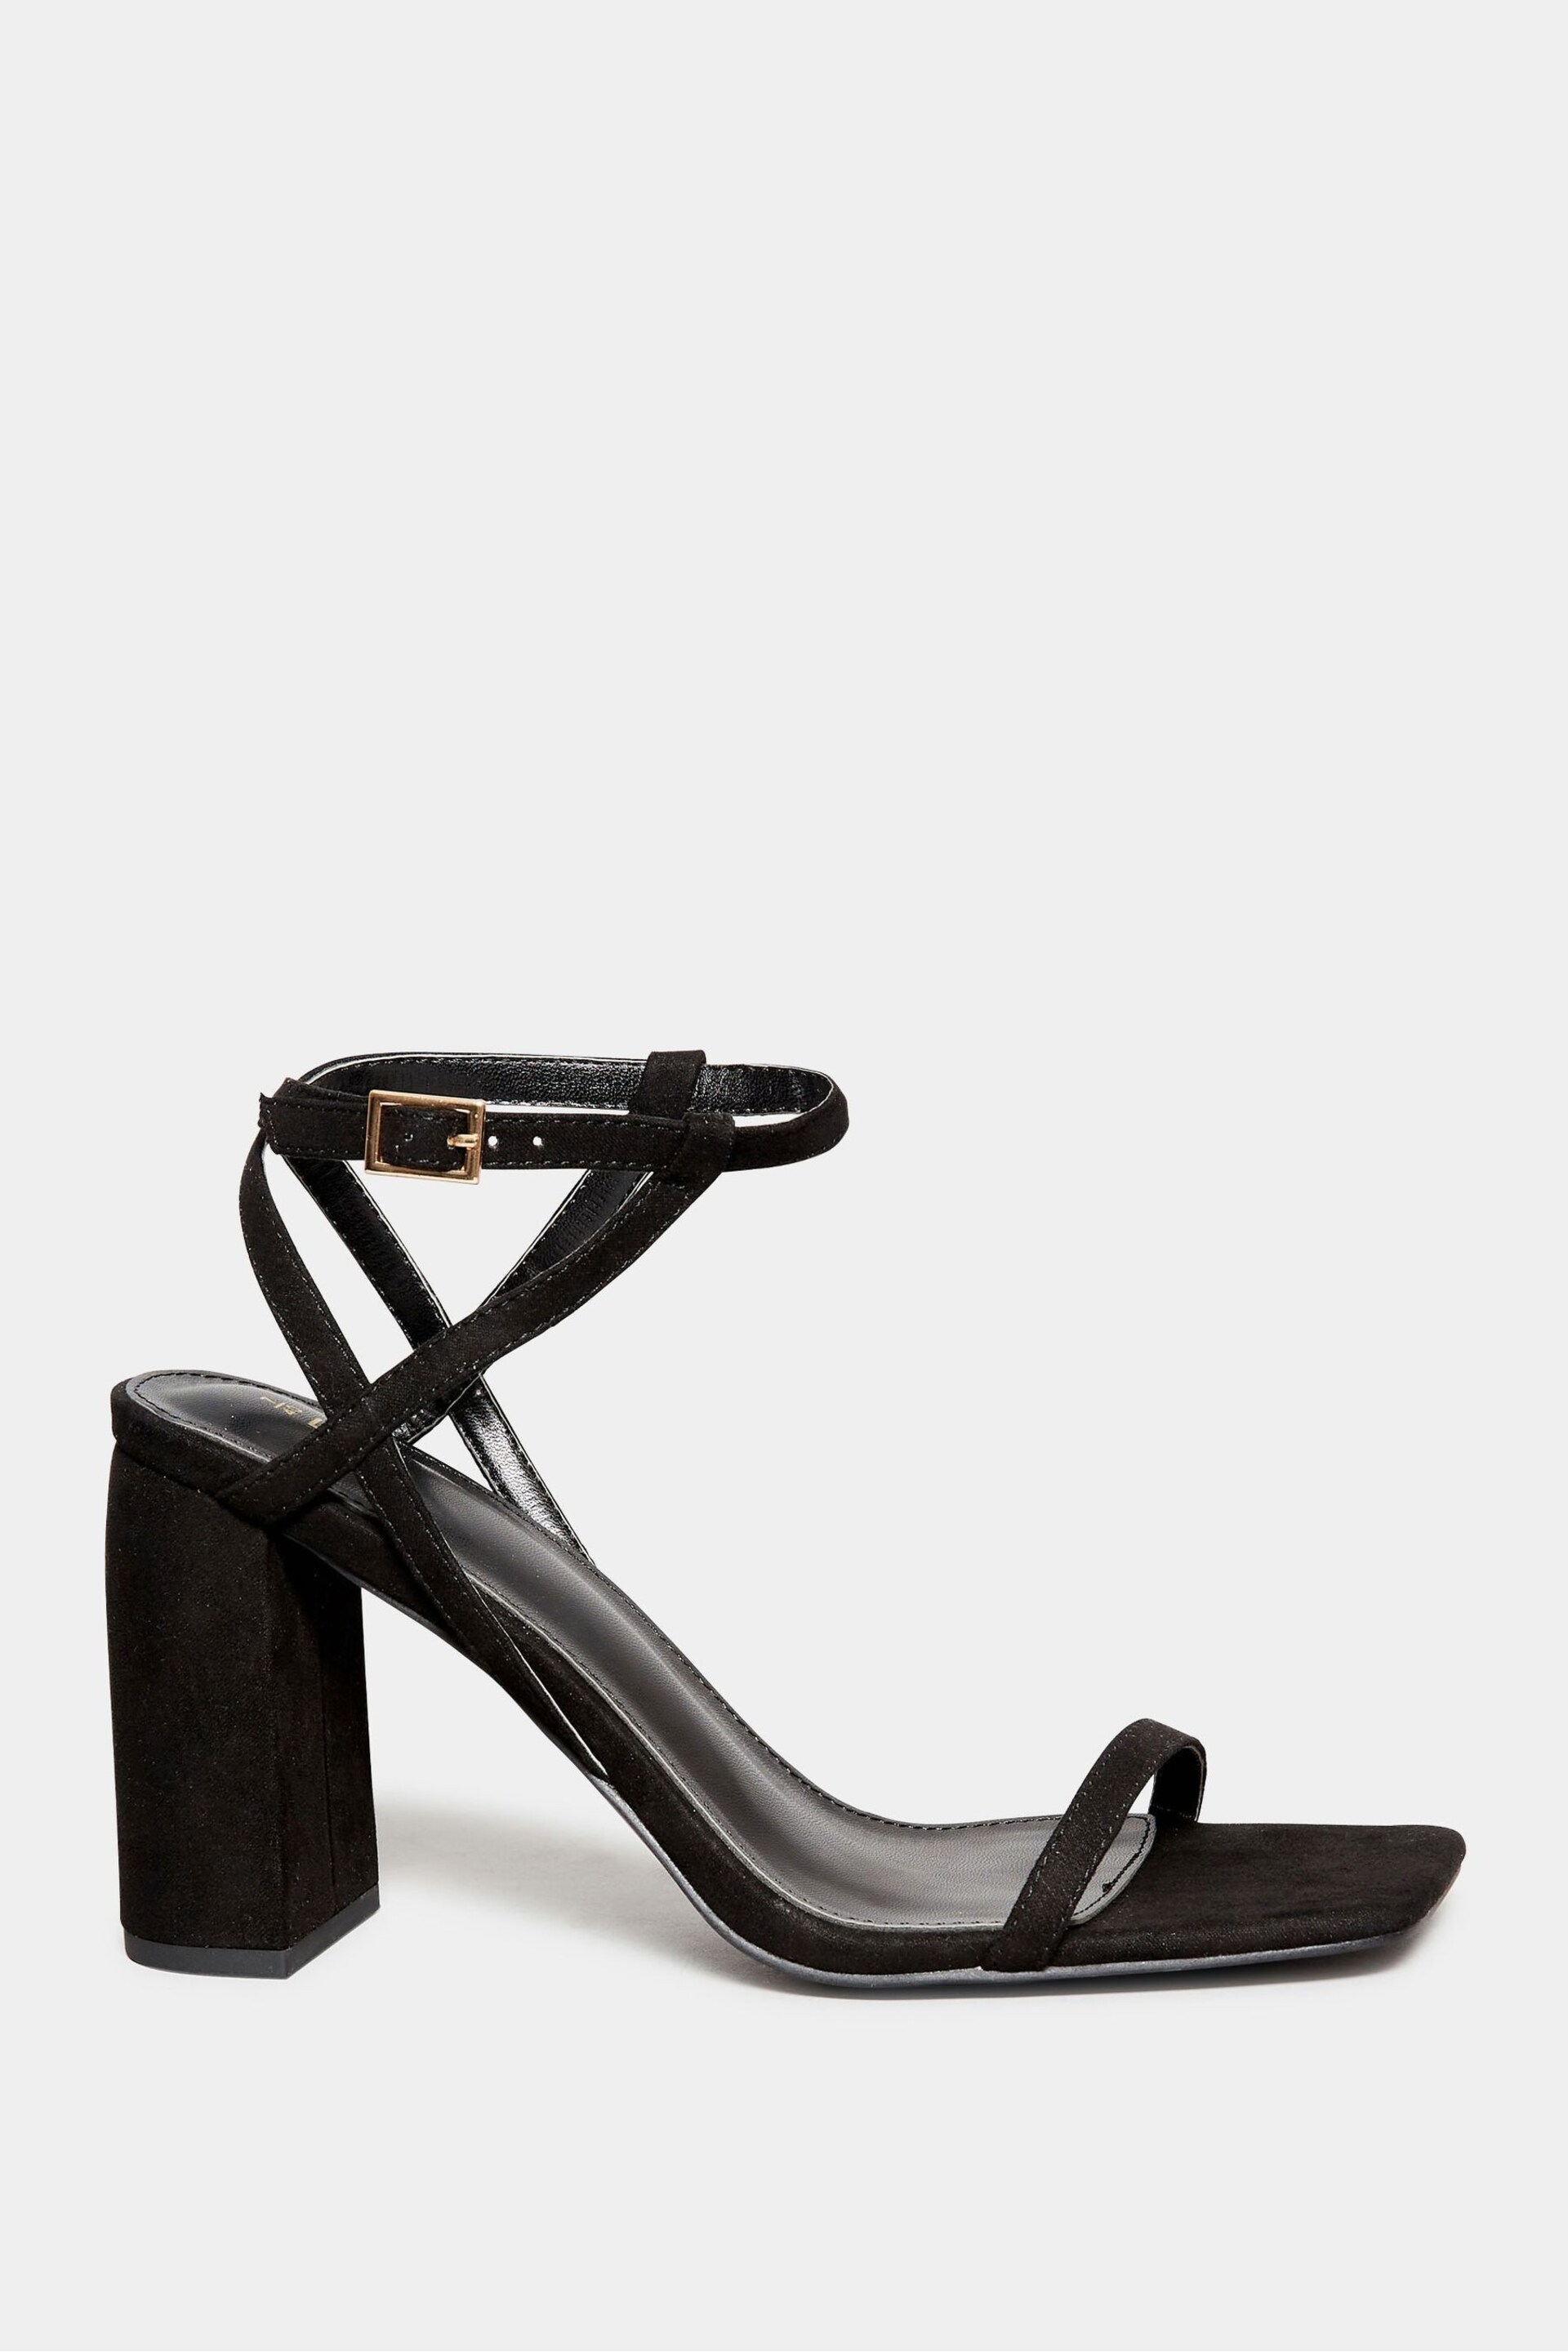 Long Tall Sally Black Faux Suede Block Heels - Image 3 of 6